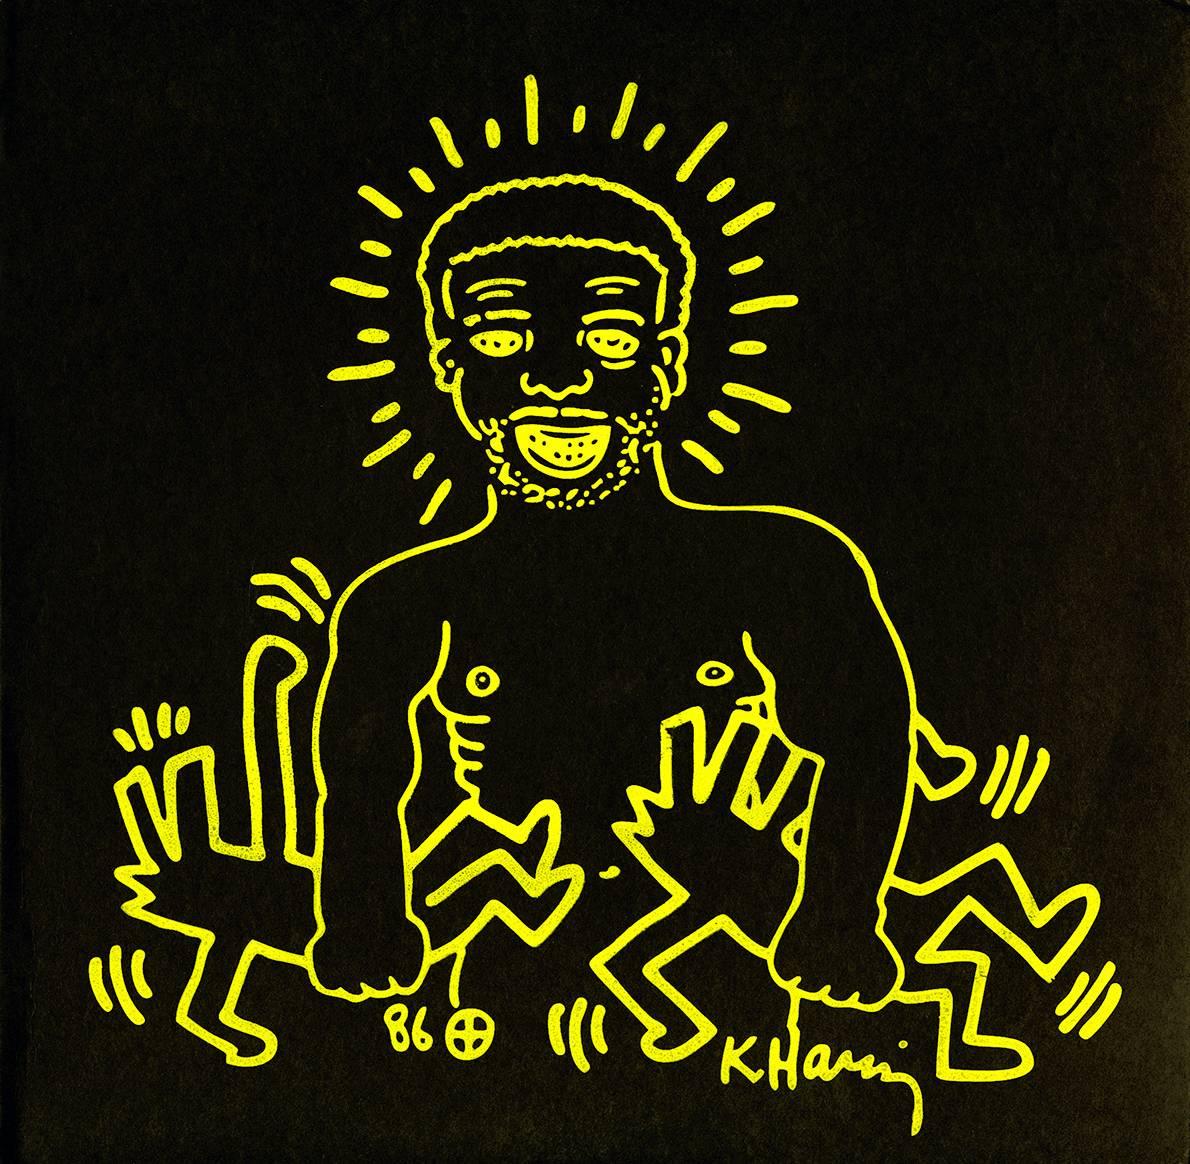 Rare Keith Haring Record Art (Keith Haring Larry Levan Paradise Garage) - Print by (after) Keith Haring